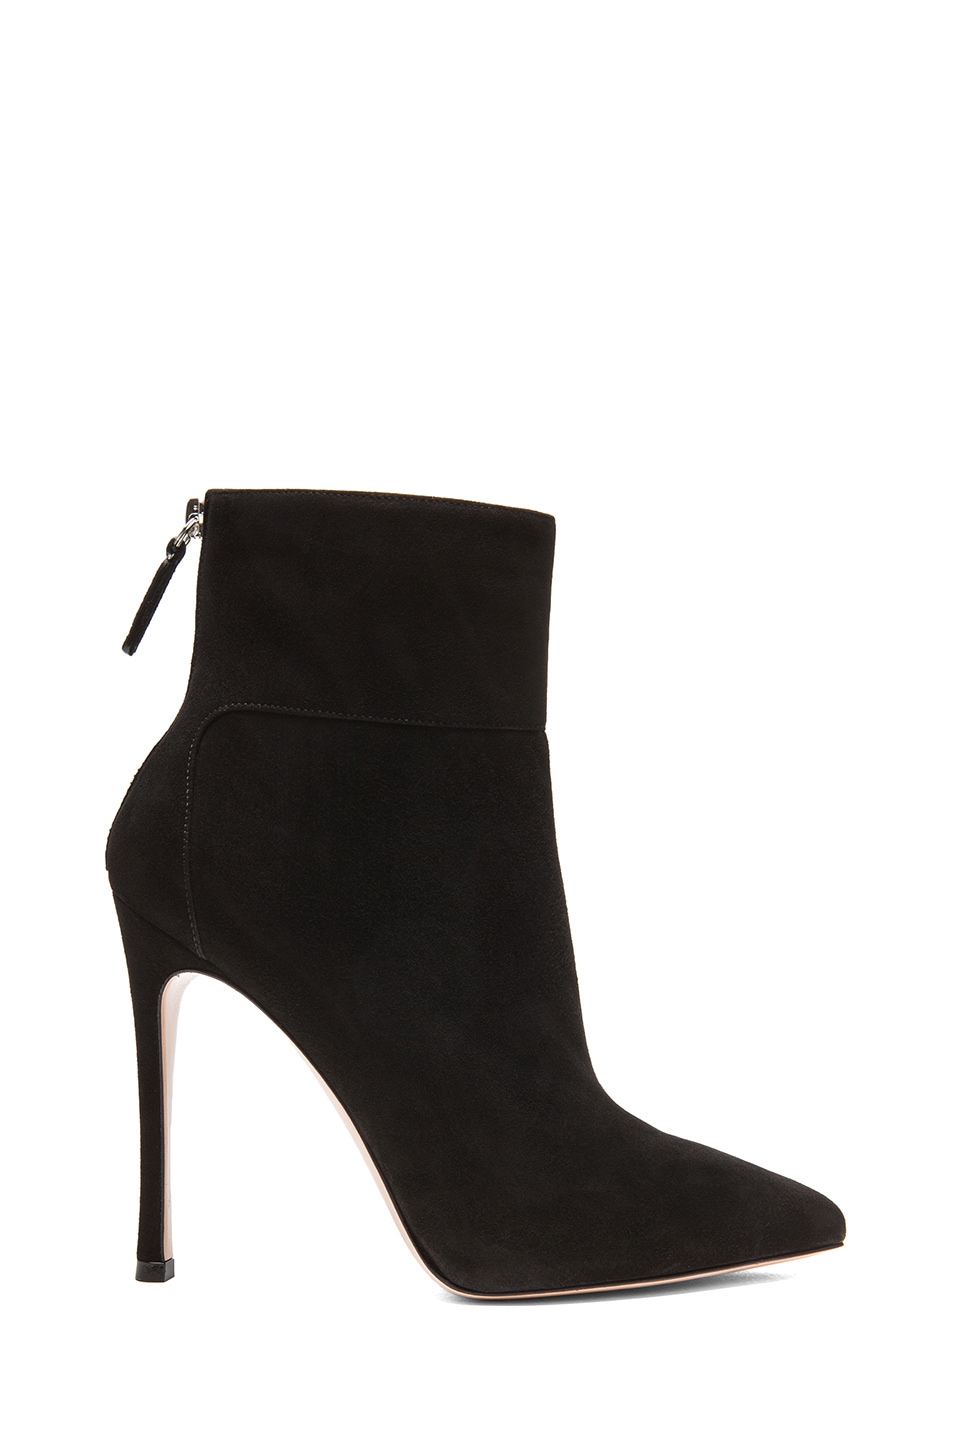 Gianvito Rossi Suede Ankle Booties in Black | FWRD